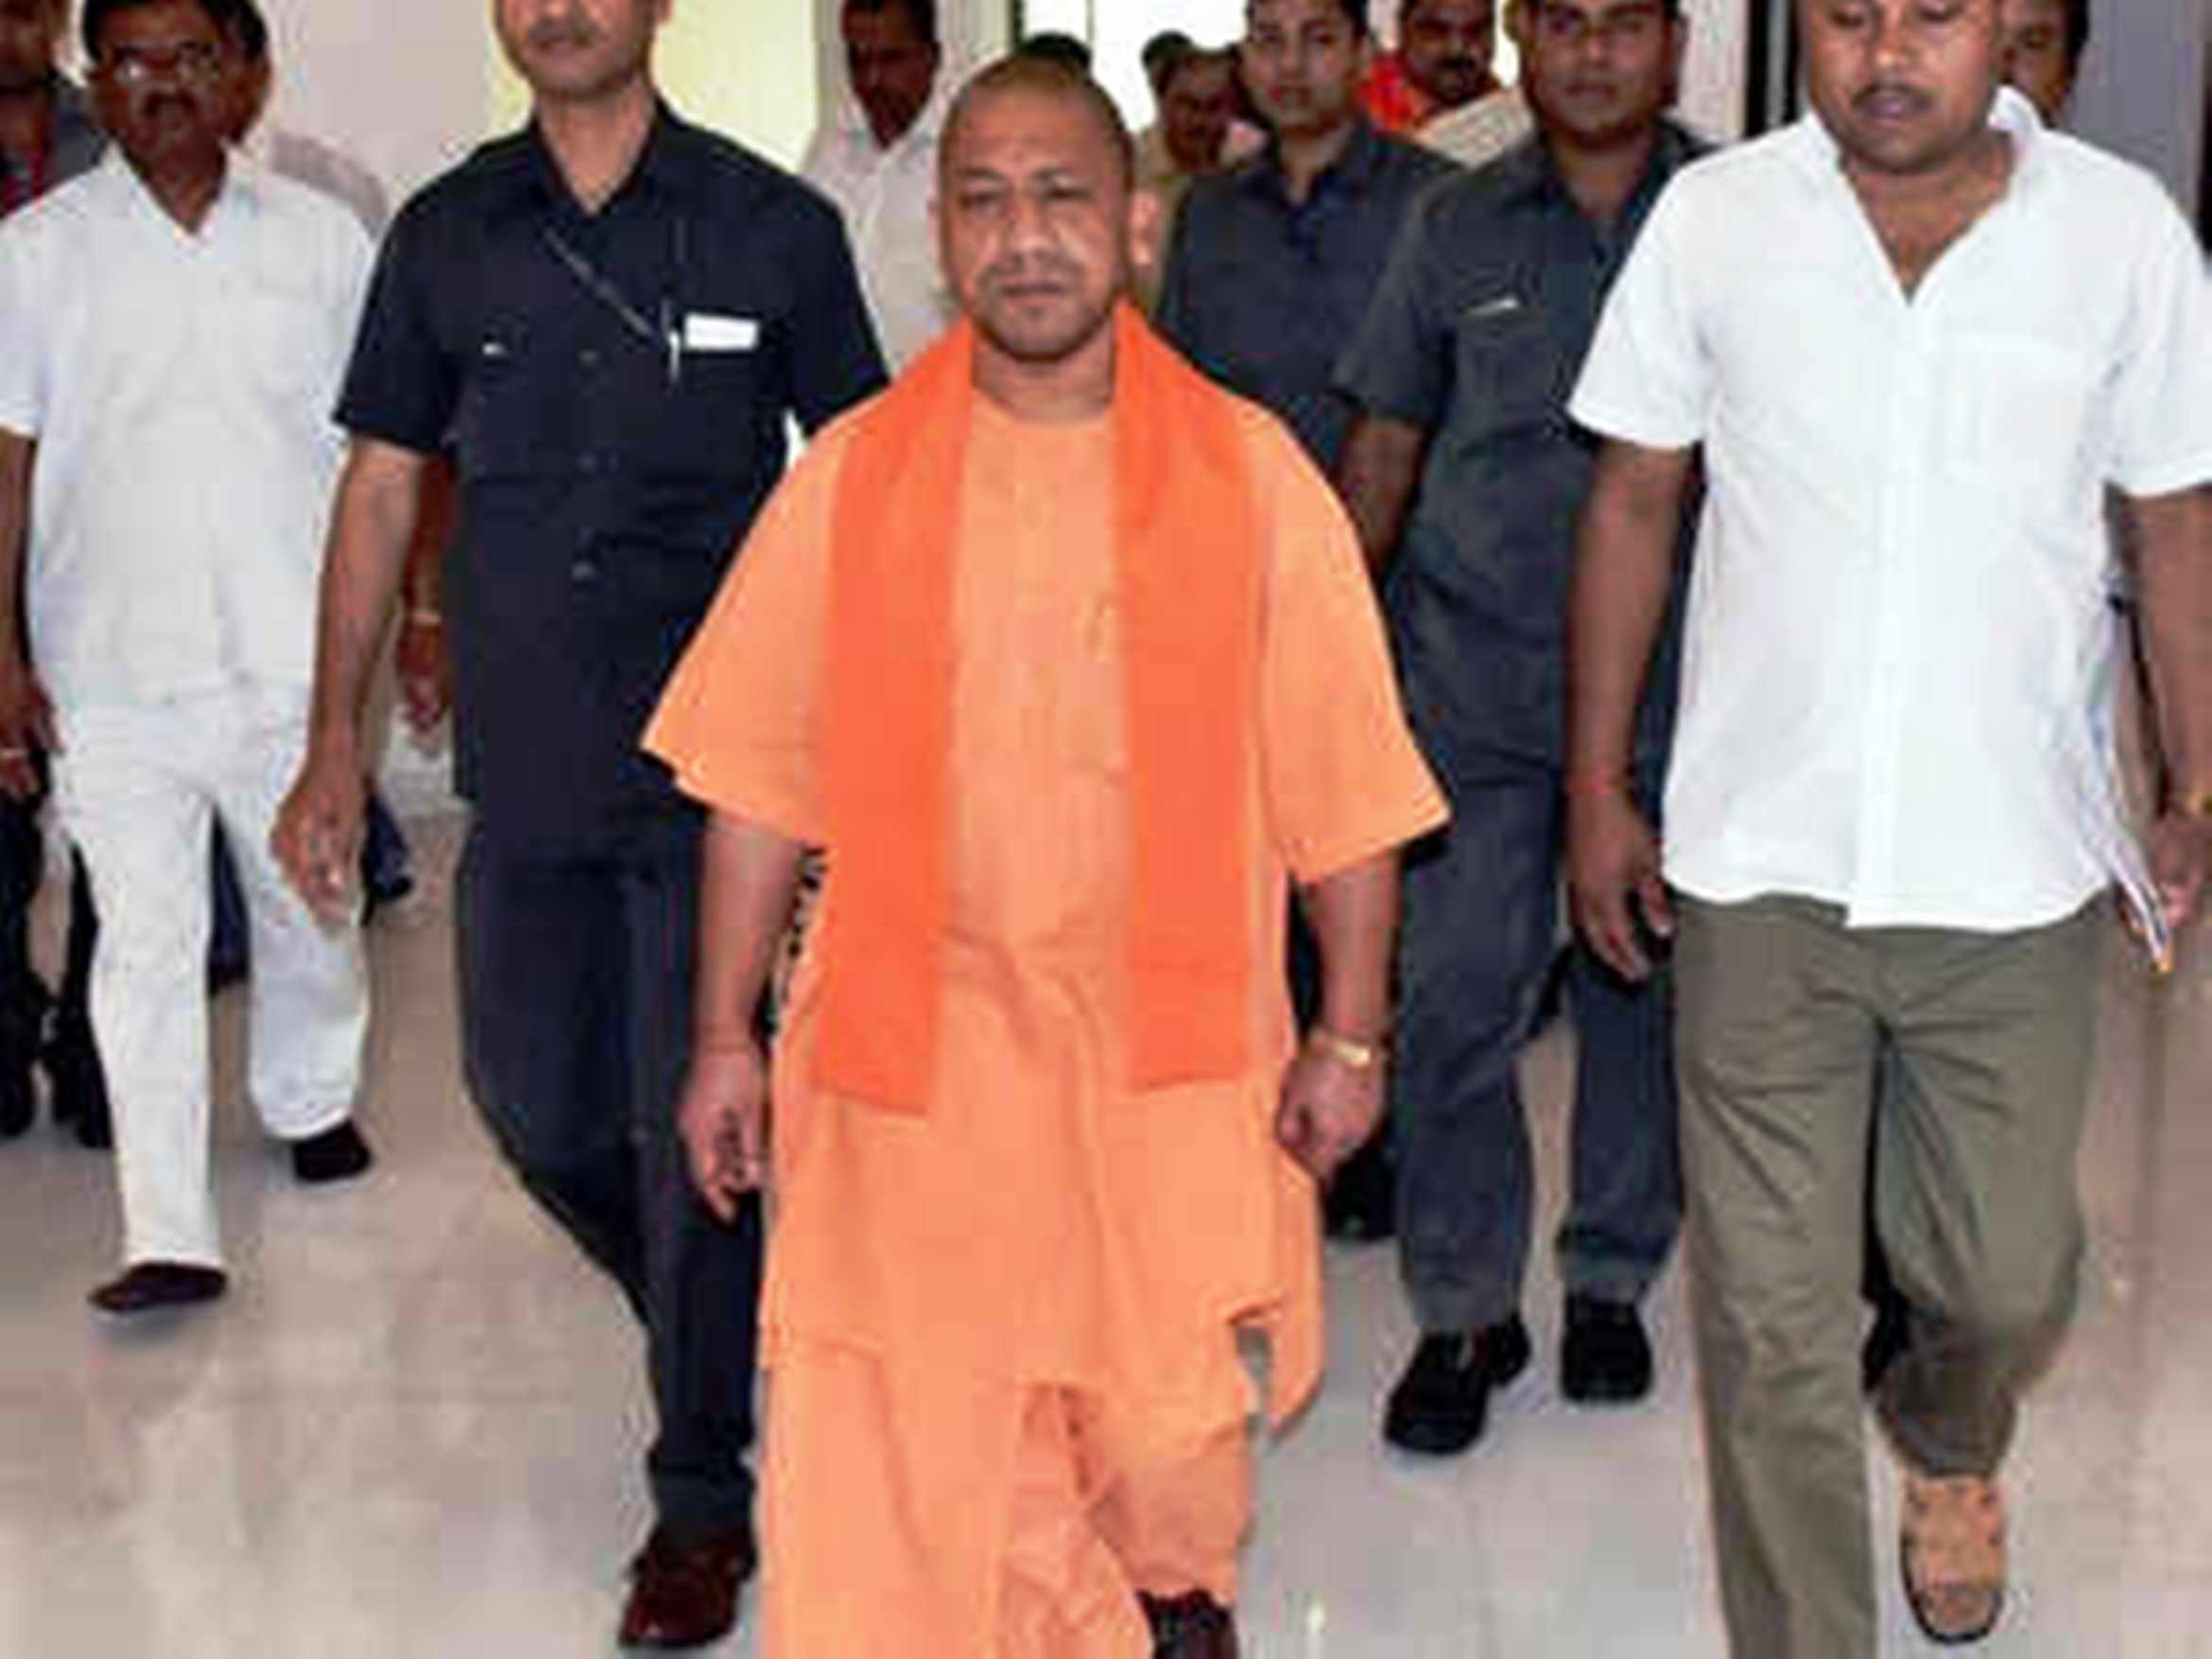 cm yogi directed official for tight action in poisonous liquor case